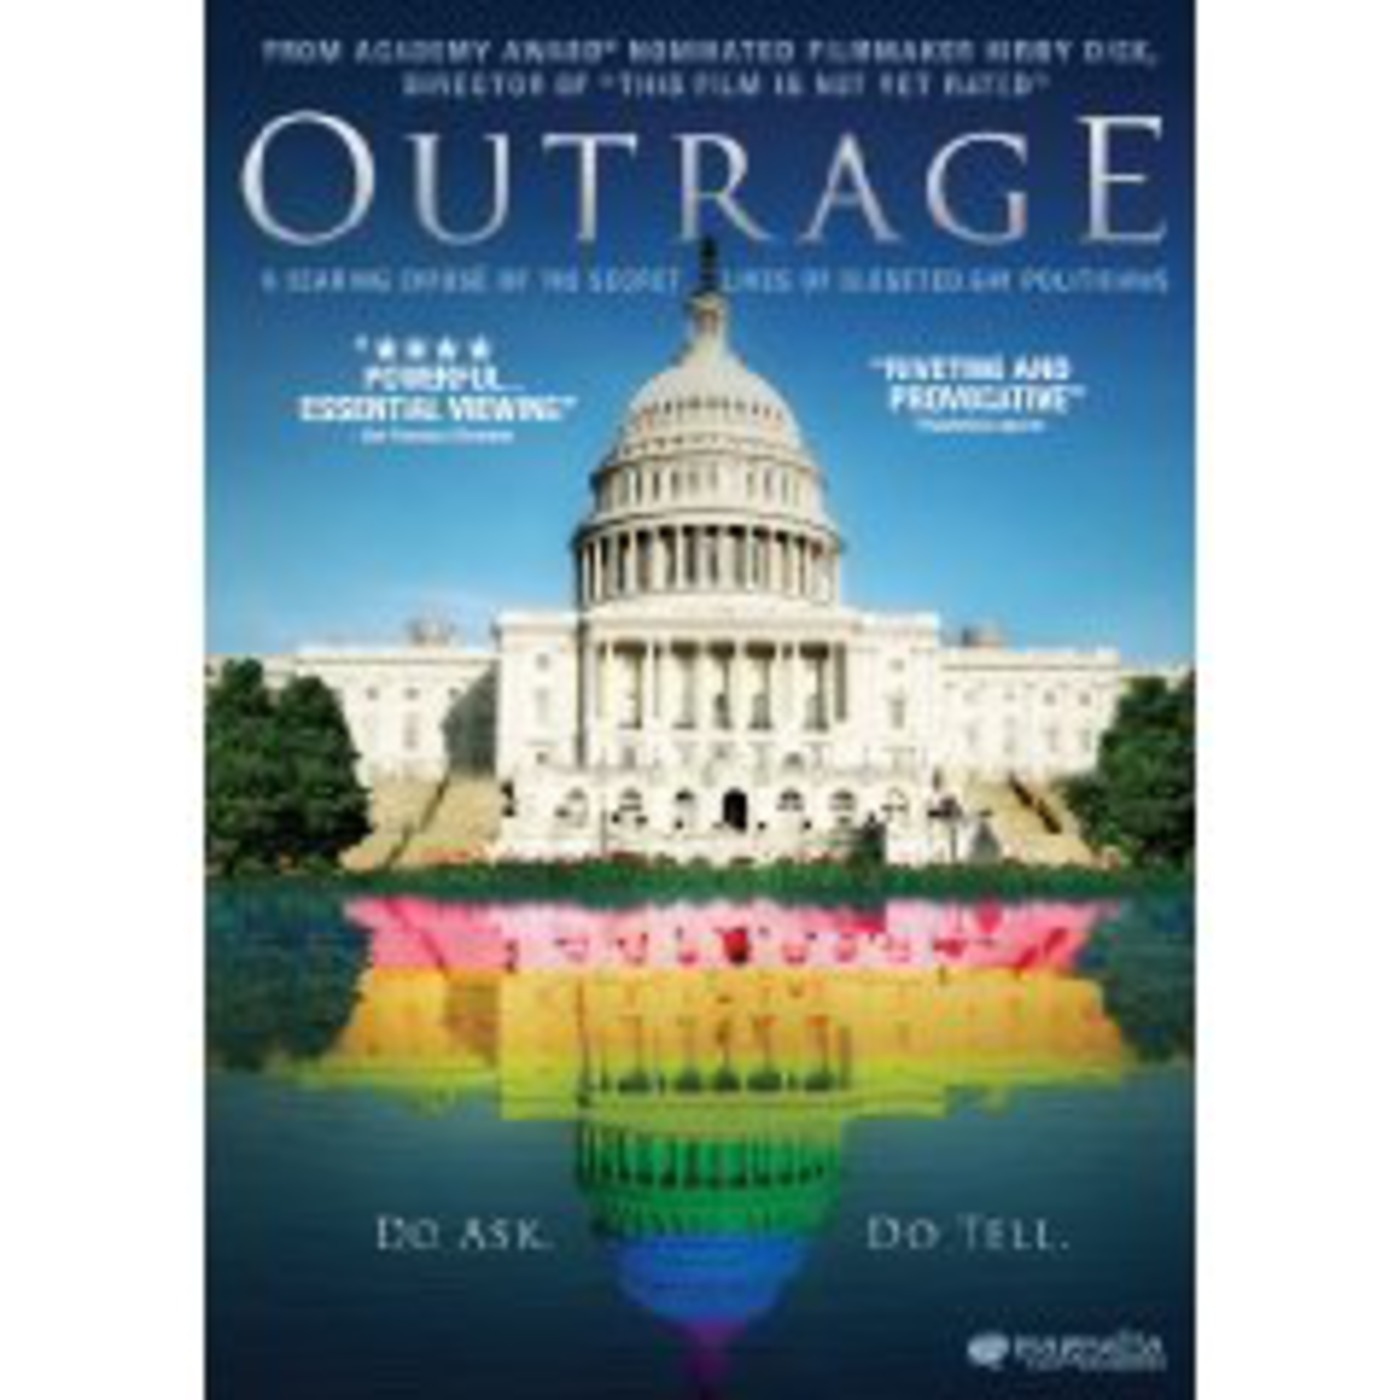 (65) ’Outrage’ Director Kirby Dick